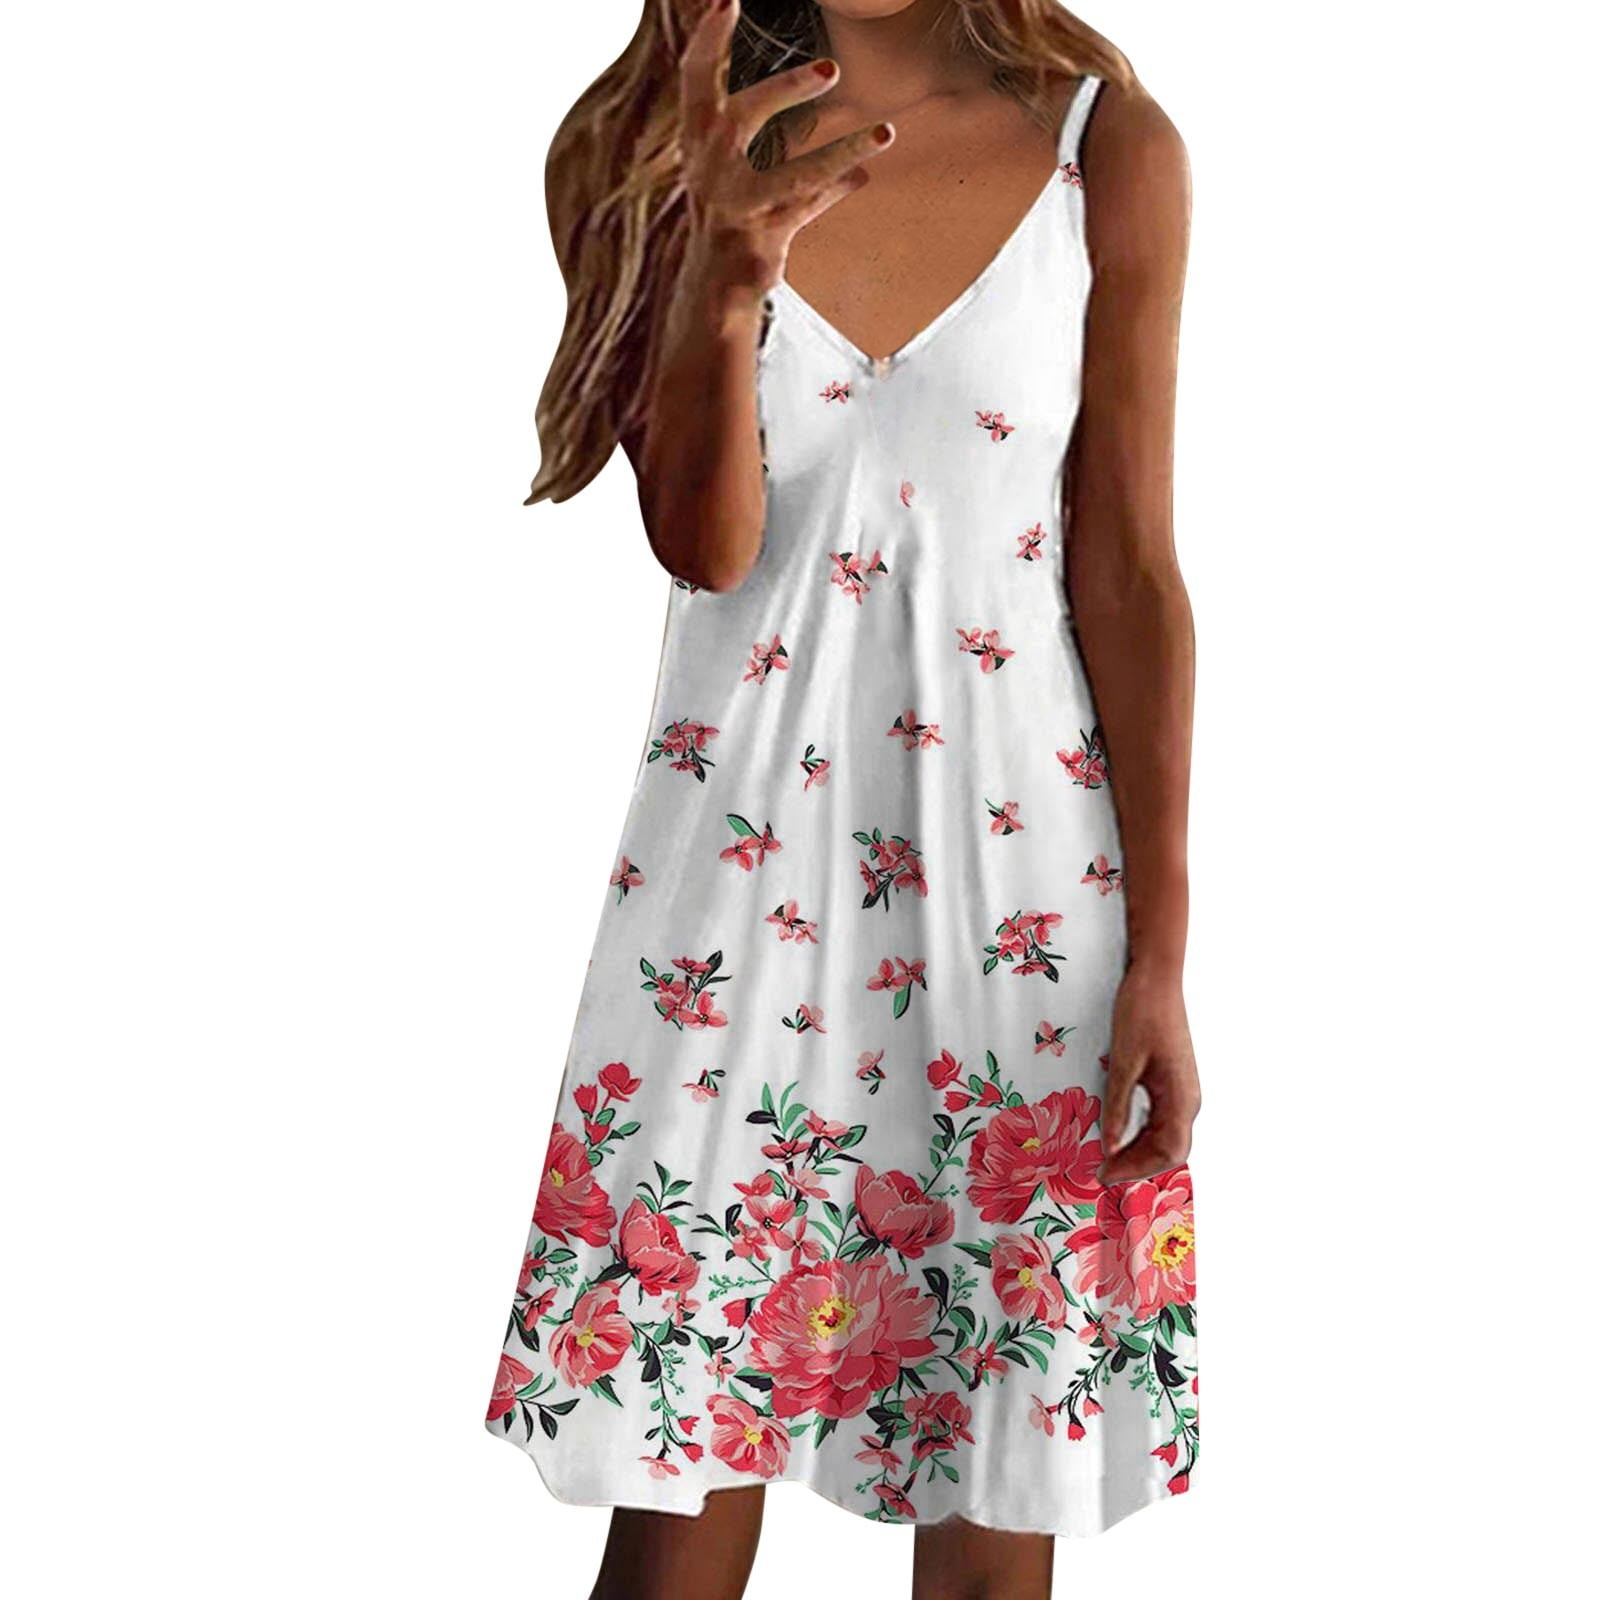 HSMQHJWE Funeral Outfit For Women Tunic Long Sleeve Womens Fashion Casual  Boho Floral V Neck Midi Dress Sleeveless Ladies Summer Beach Sundress  Ruched